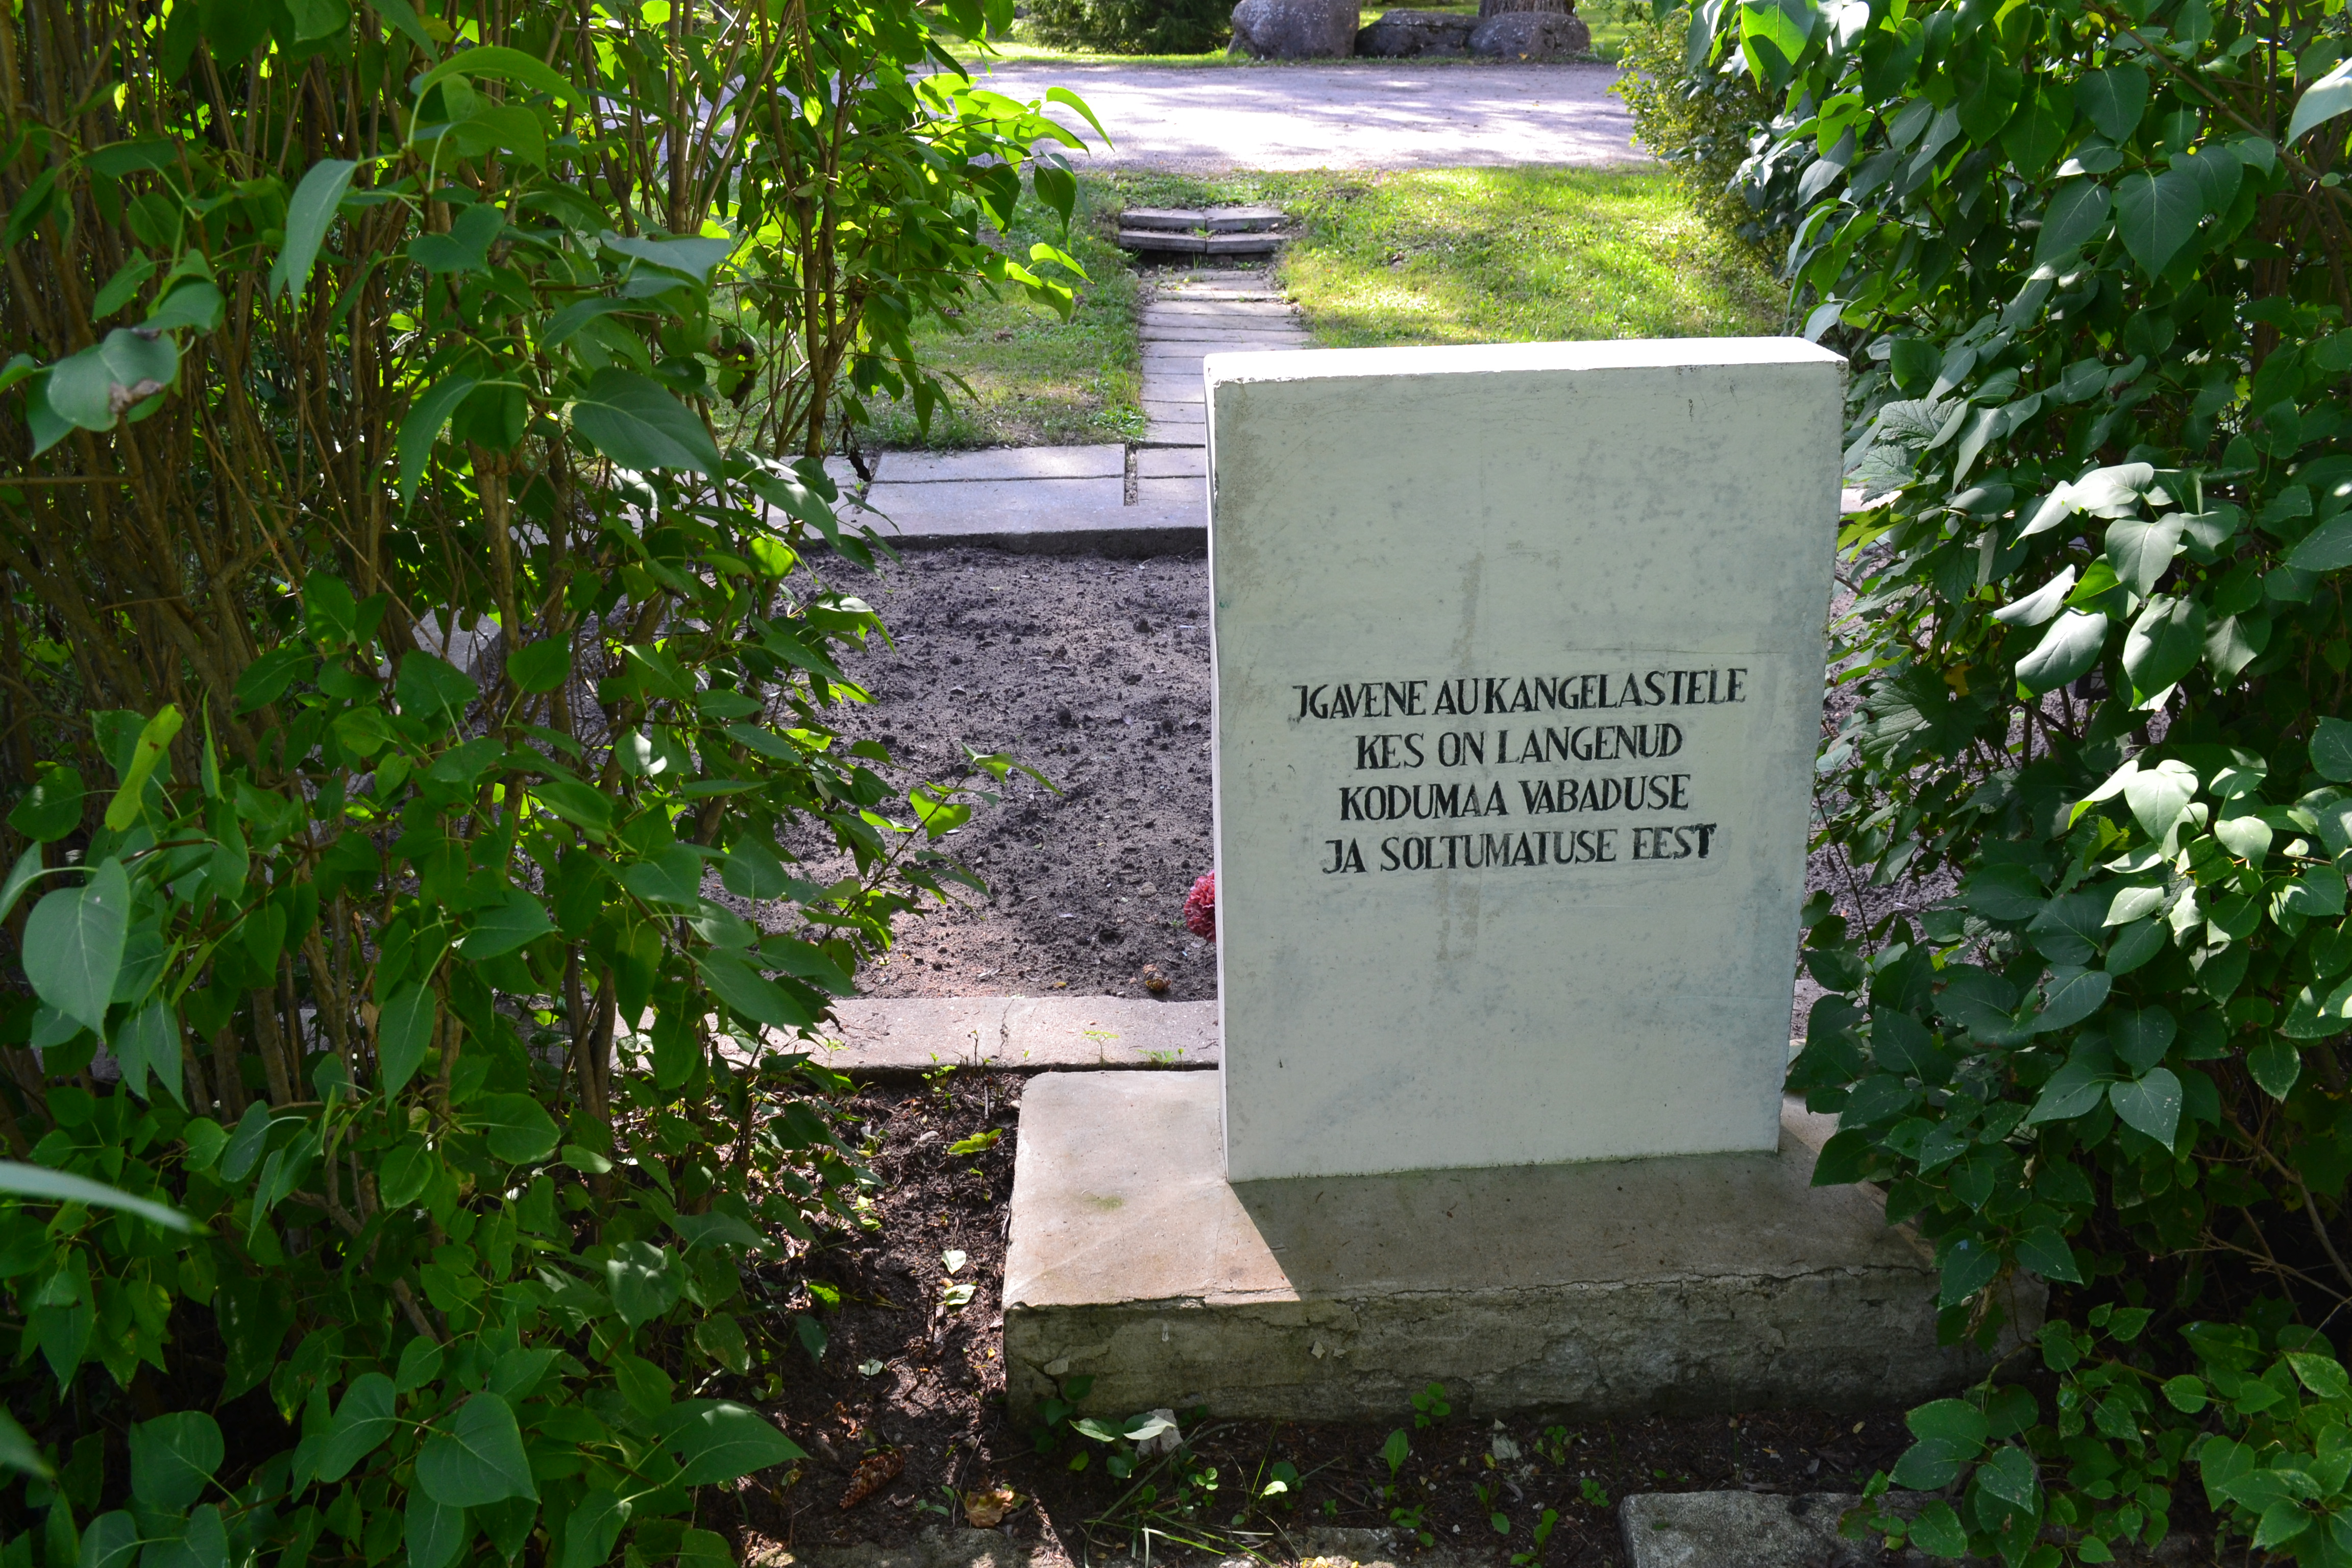 In the 1970s at the school of Taebla there was a sign of the grave of an unknown soldier, which disappeared unknown direction in 2013.